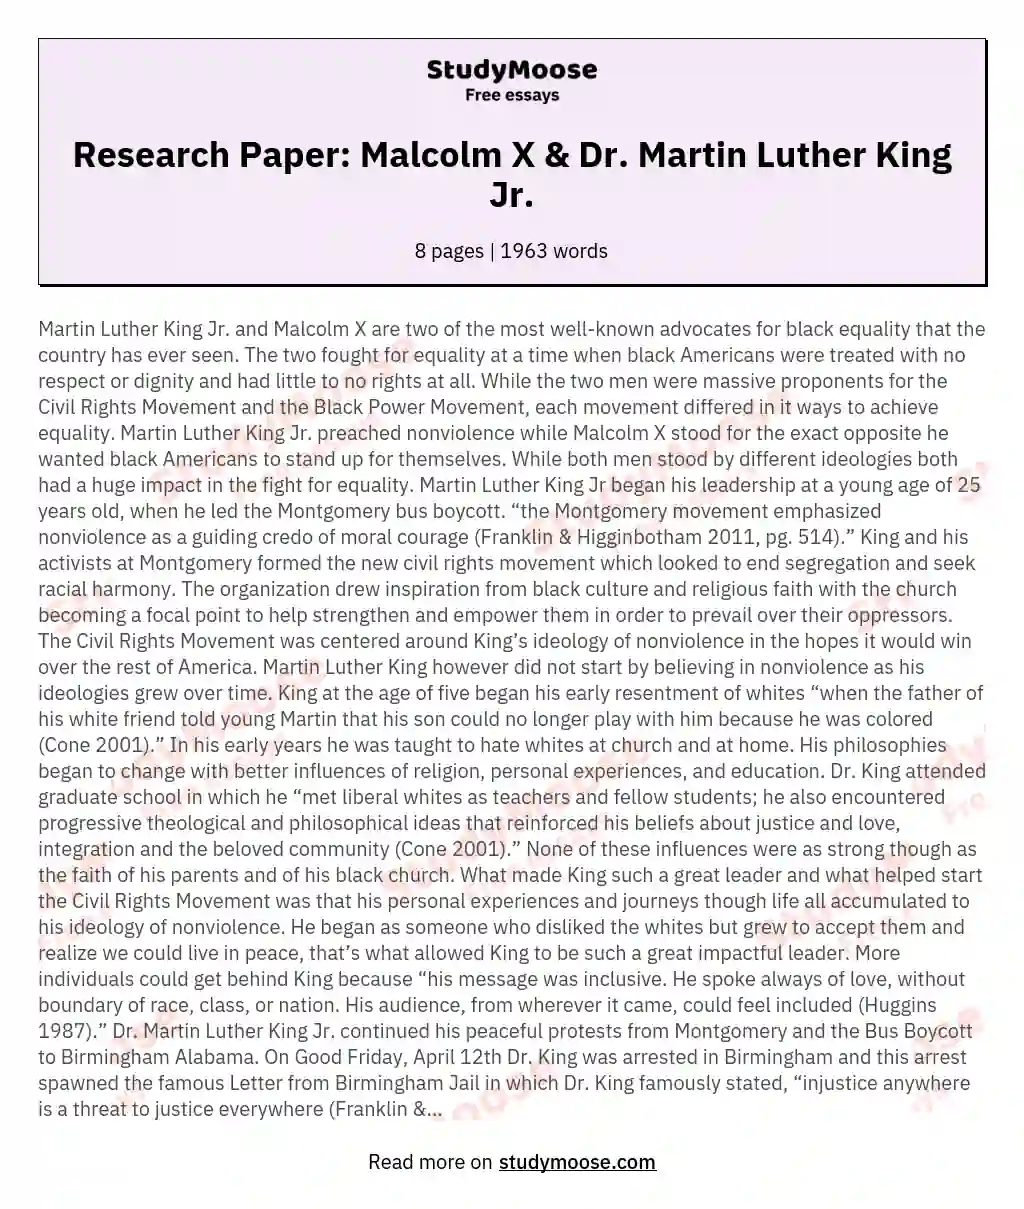 Research Paper: Malcolm X & Dr. Martin Luther King Jr.